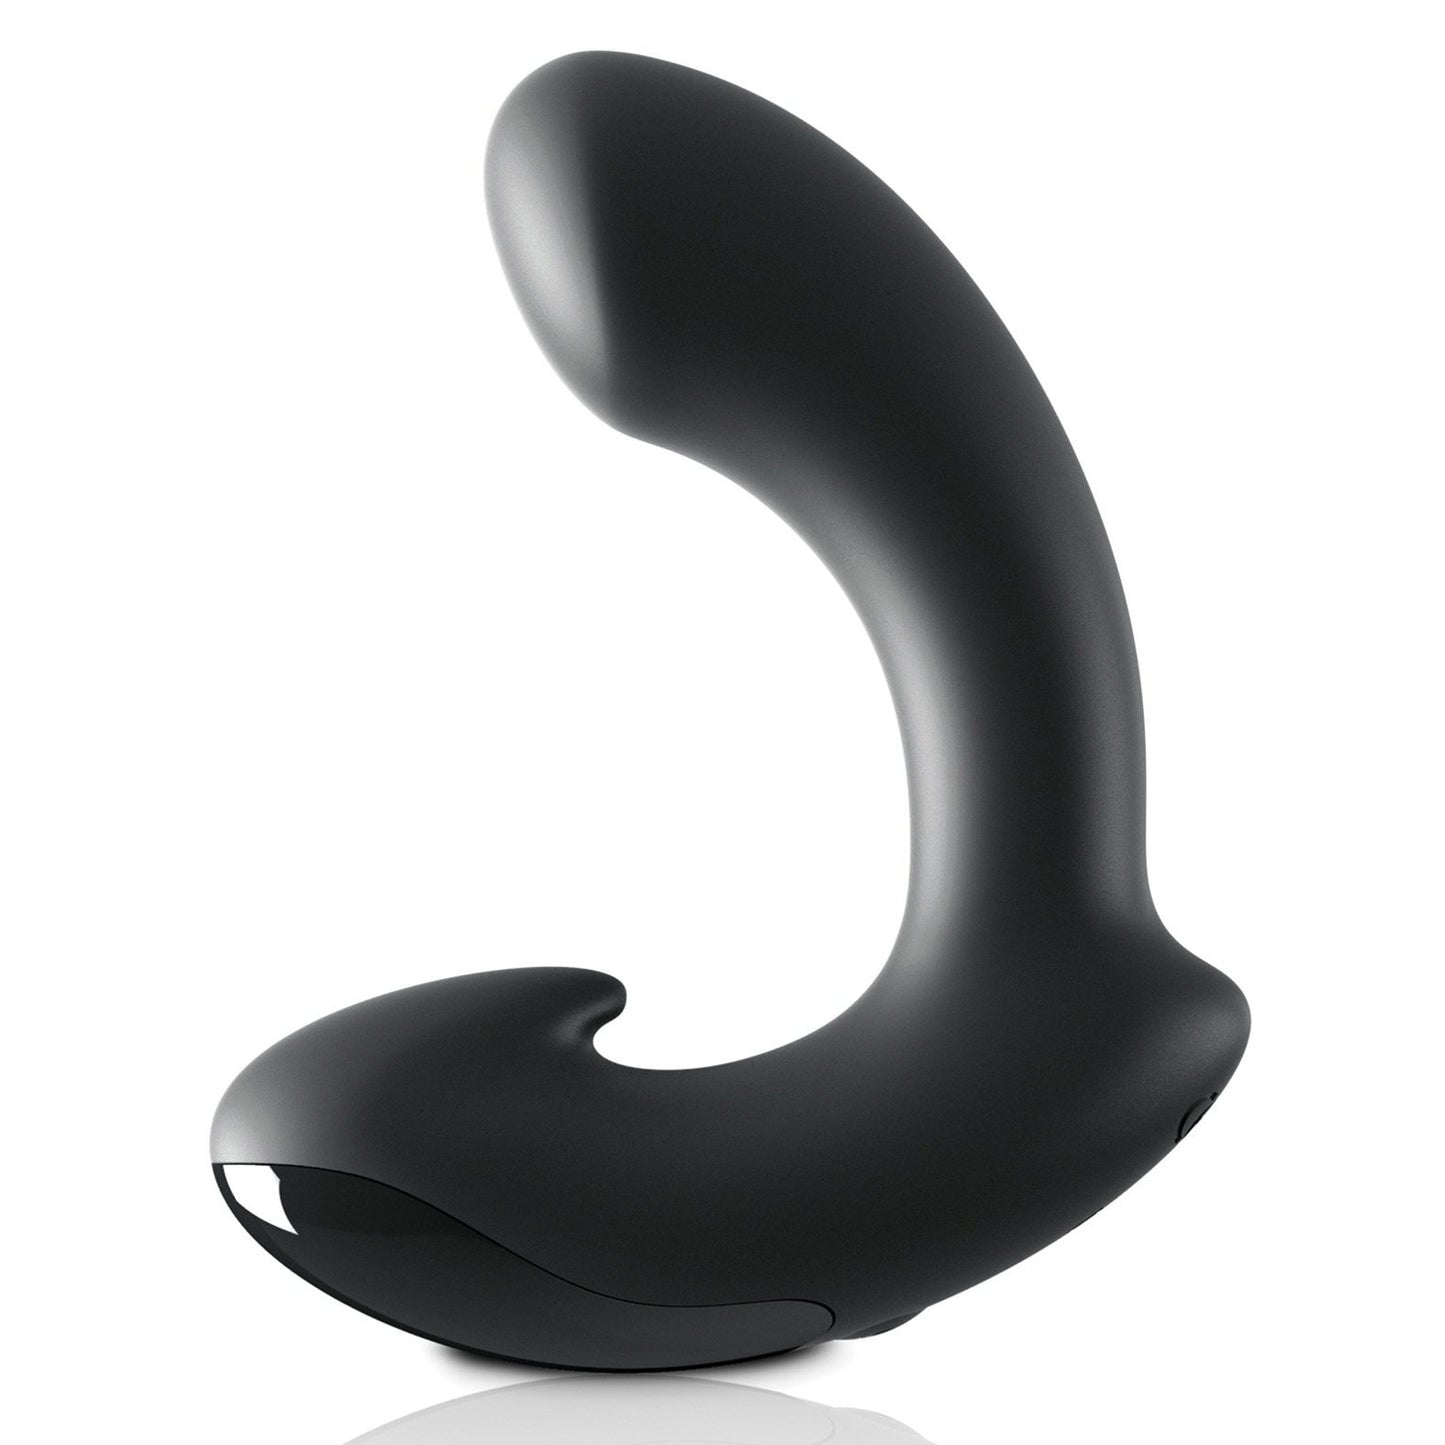 Sir Richards Control Silicone P-Spot Massager